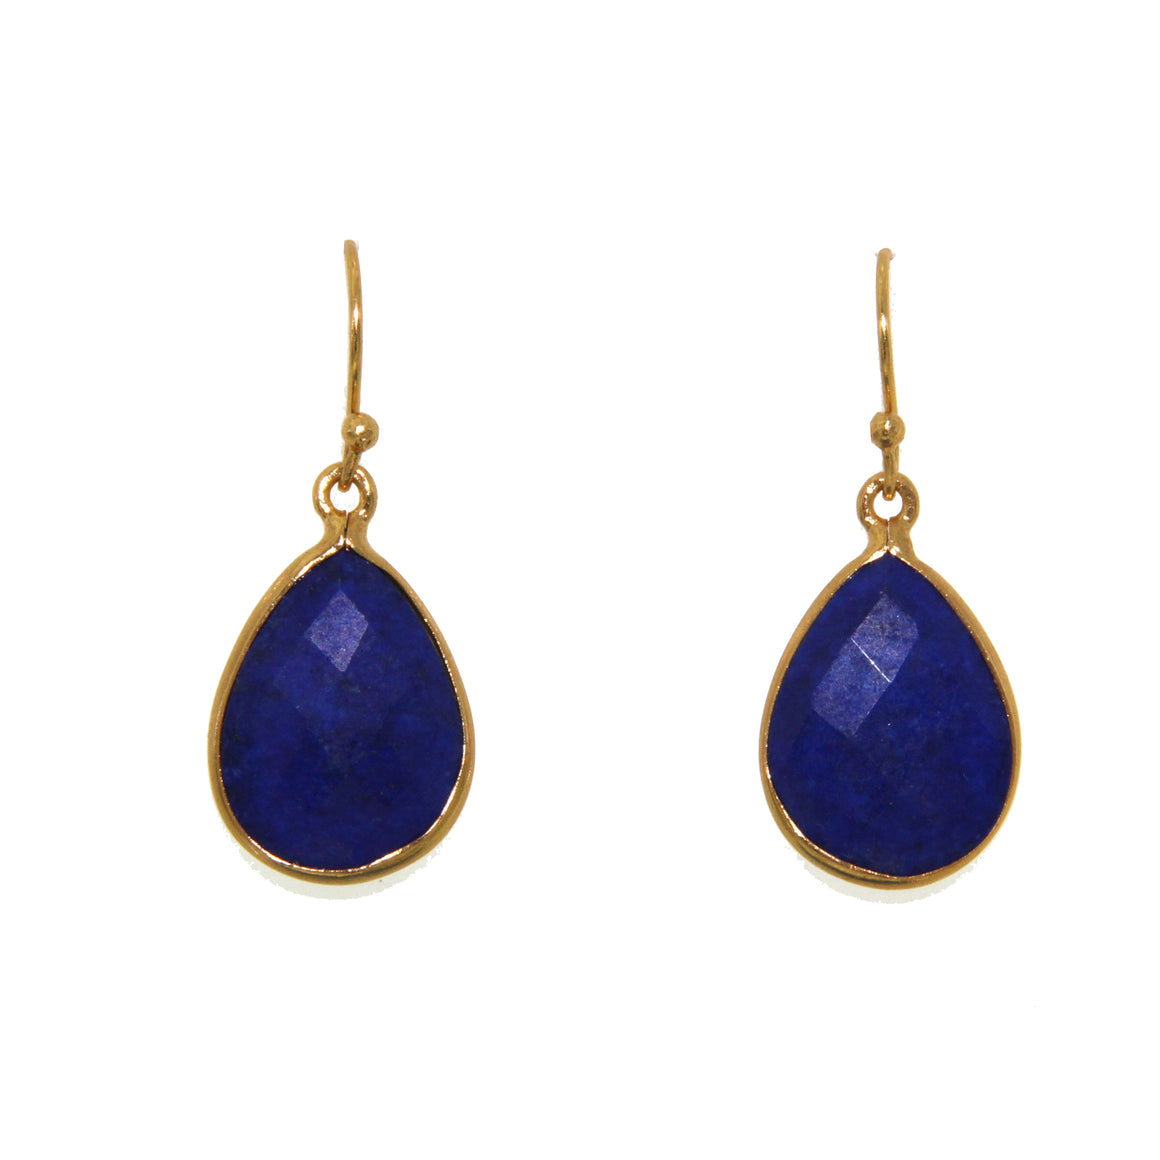 Almond shaped Lapis in a bezel setting. Exquisitely hand crafted and naturally timeless, these earrings are set in 22 carat Vermeil over Sterling Silver.